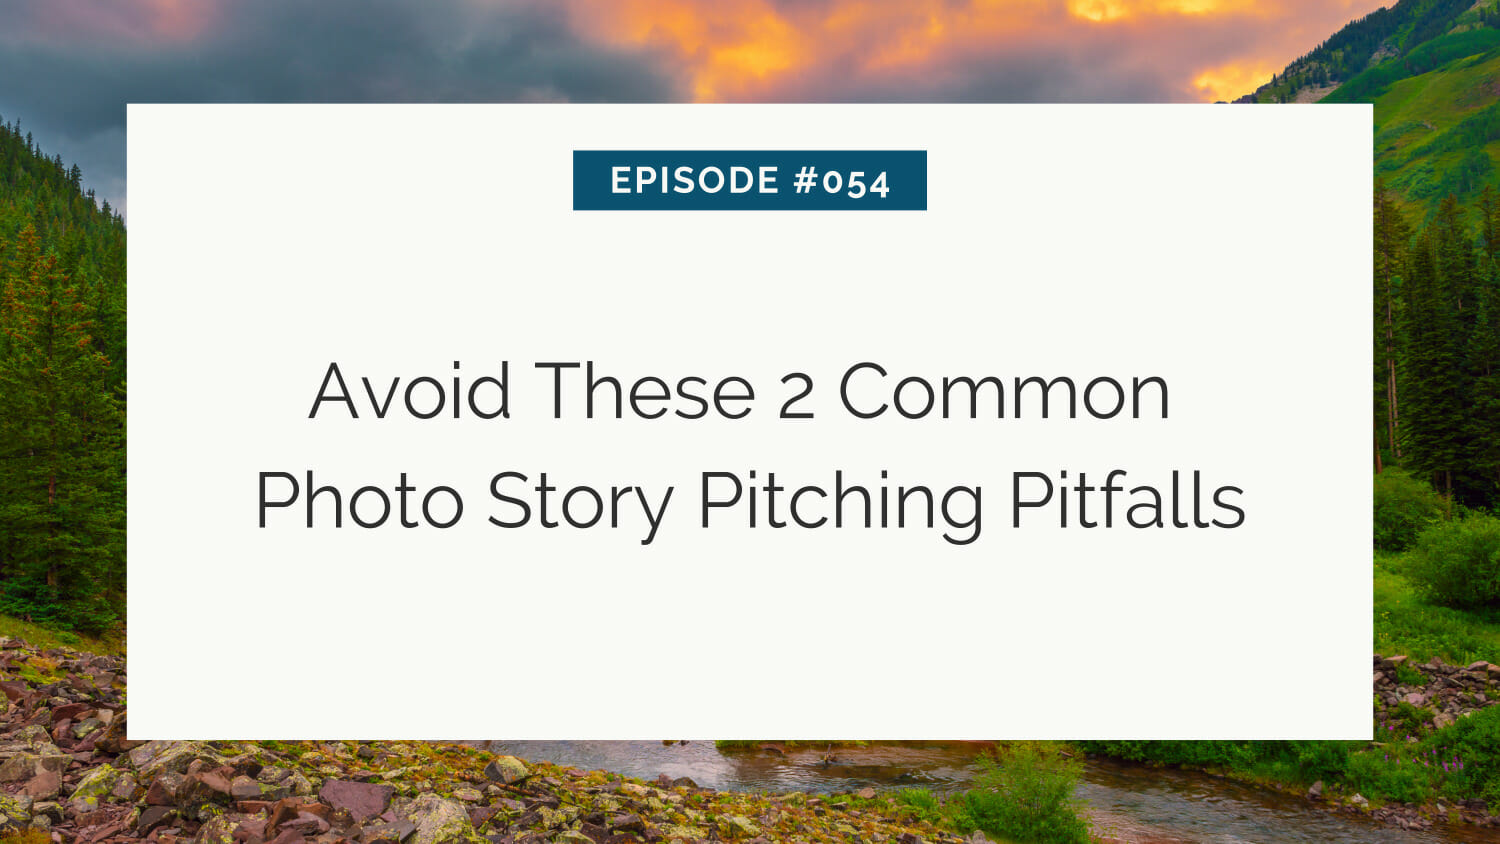 Presentation slide titled "episode #054 - avoid these 2 common photo story pitching pitfalls" with a scenic background of a forest and mountains.